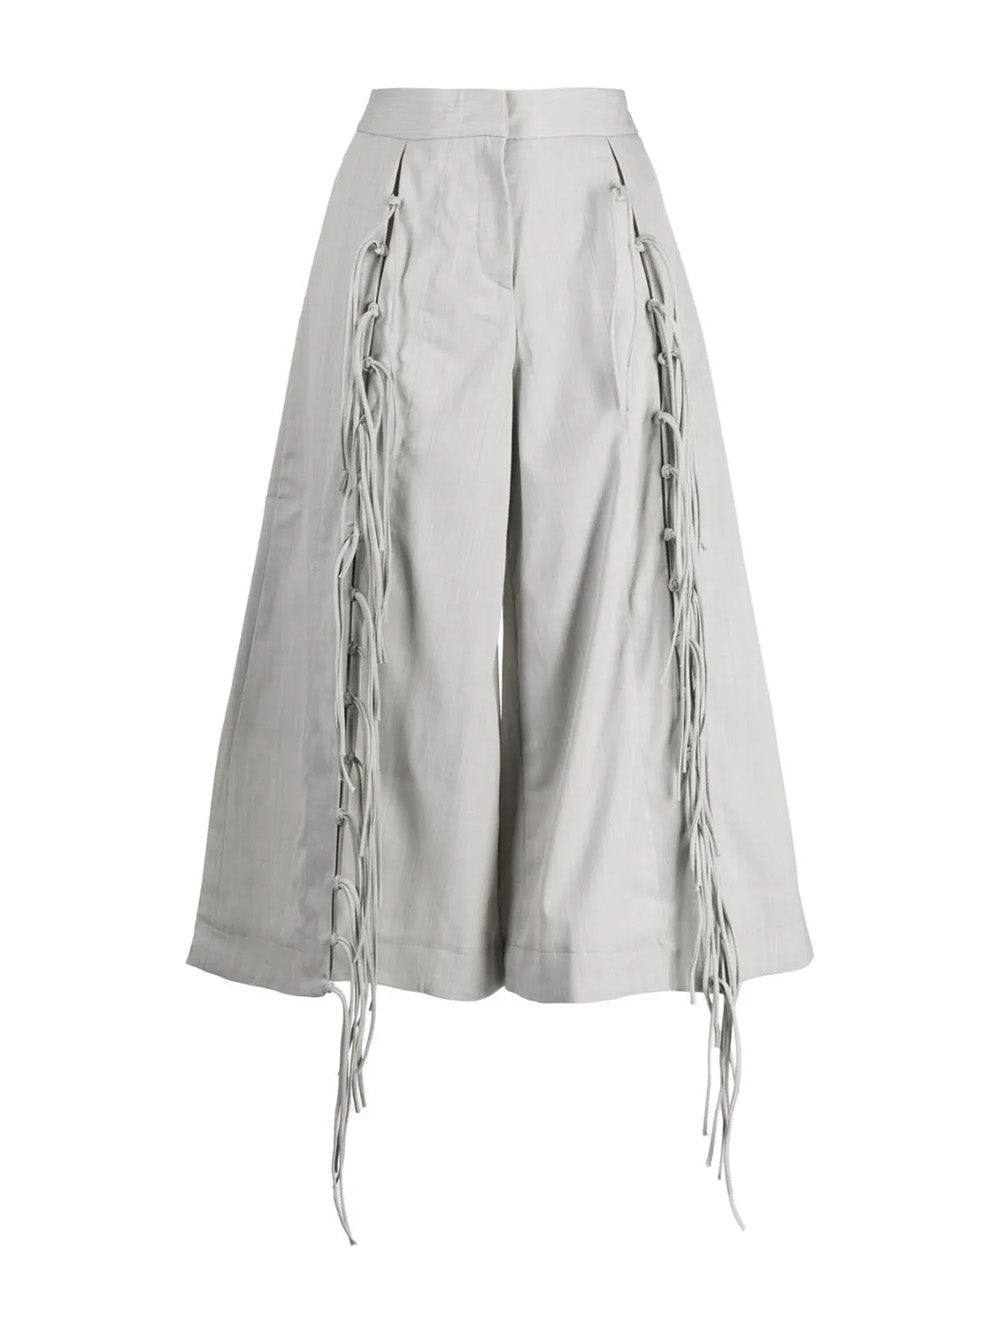       palmer-harding-Connected-Culotte-Light-Grey-1